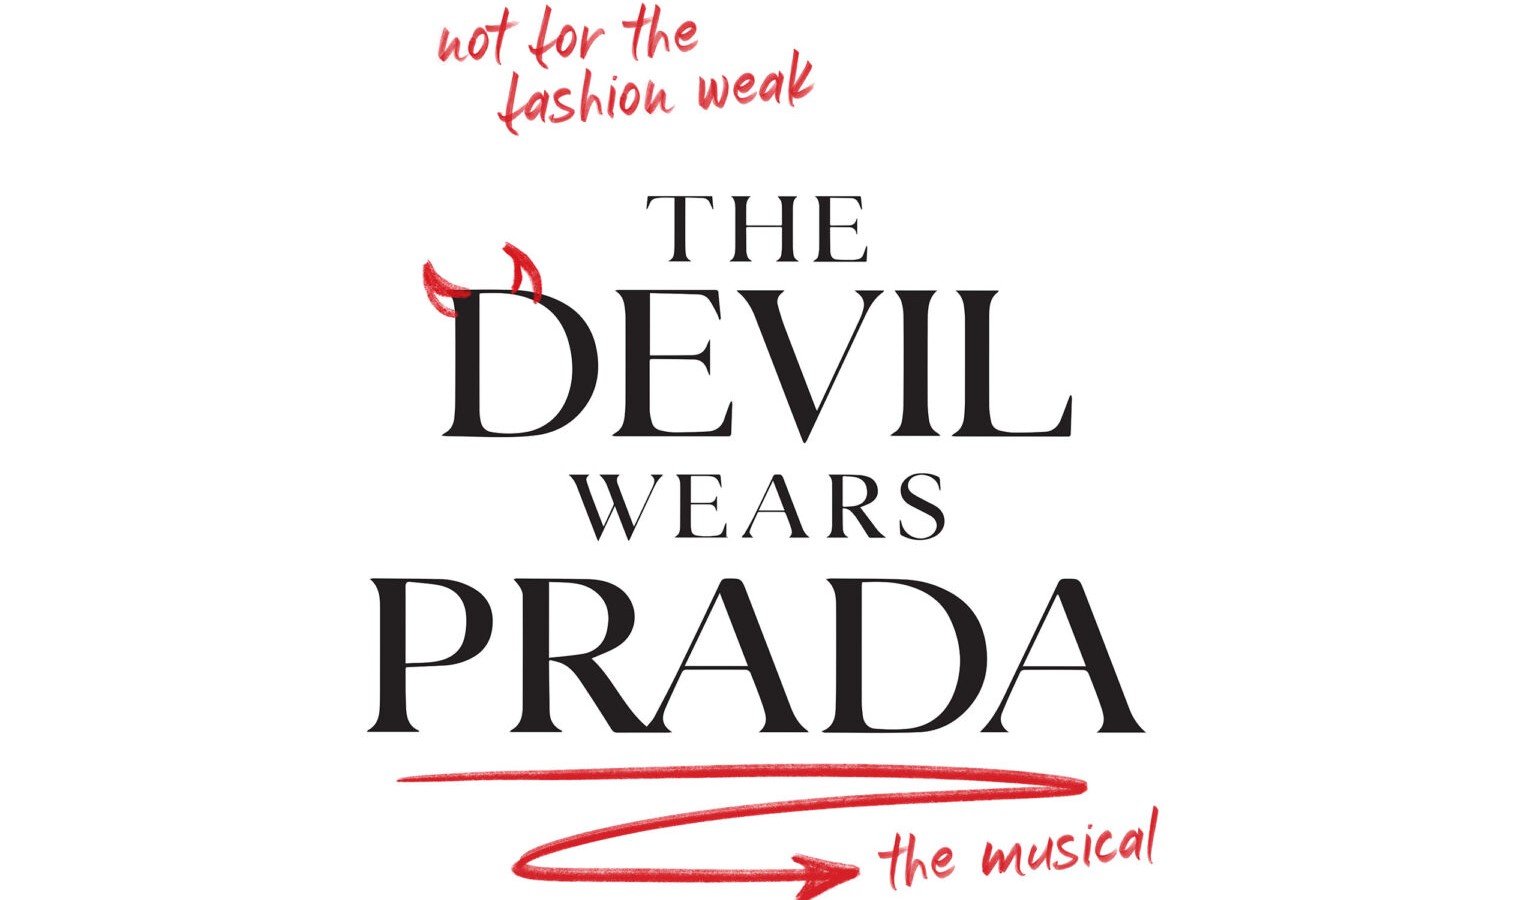 The Devil Wears Prada musical: cast, soundtrack and tickets | Woman & Home